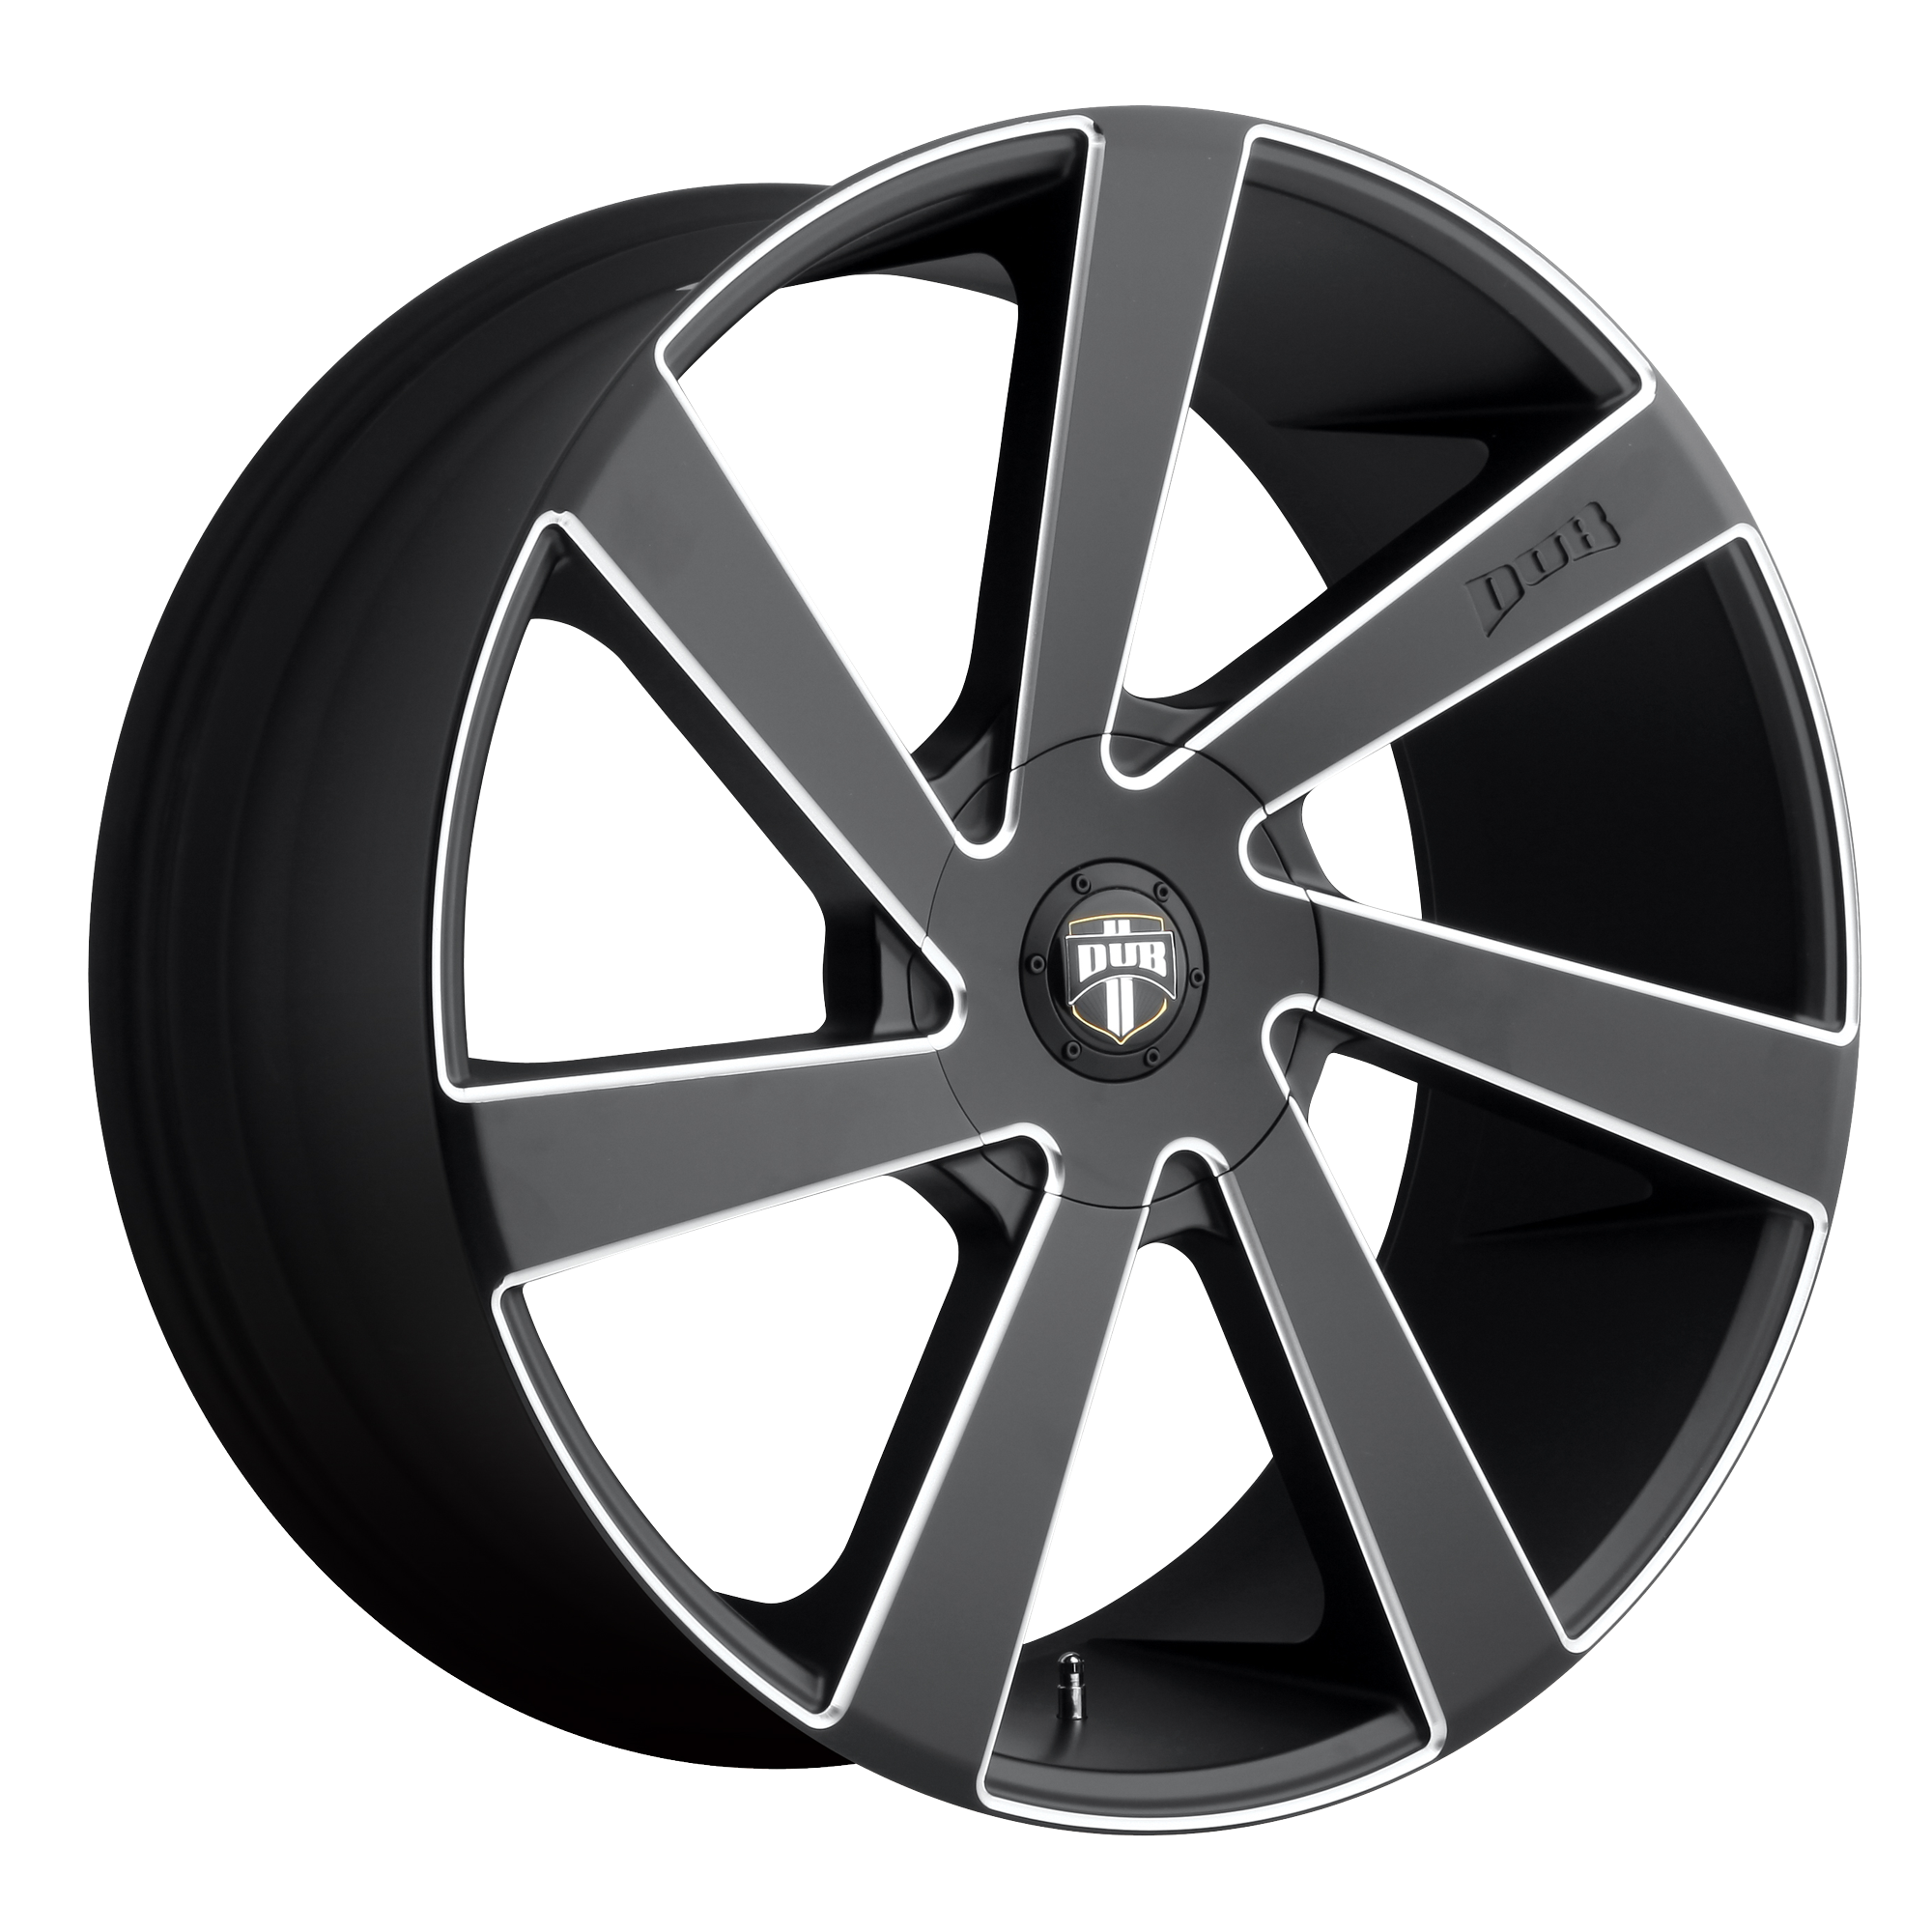 DIRECTA 22x9.5 5x114.30/5x120.00 MATTE BLACK MILLED (33 mm) - Tires and Engine Performance